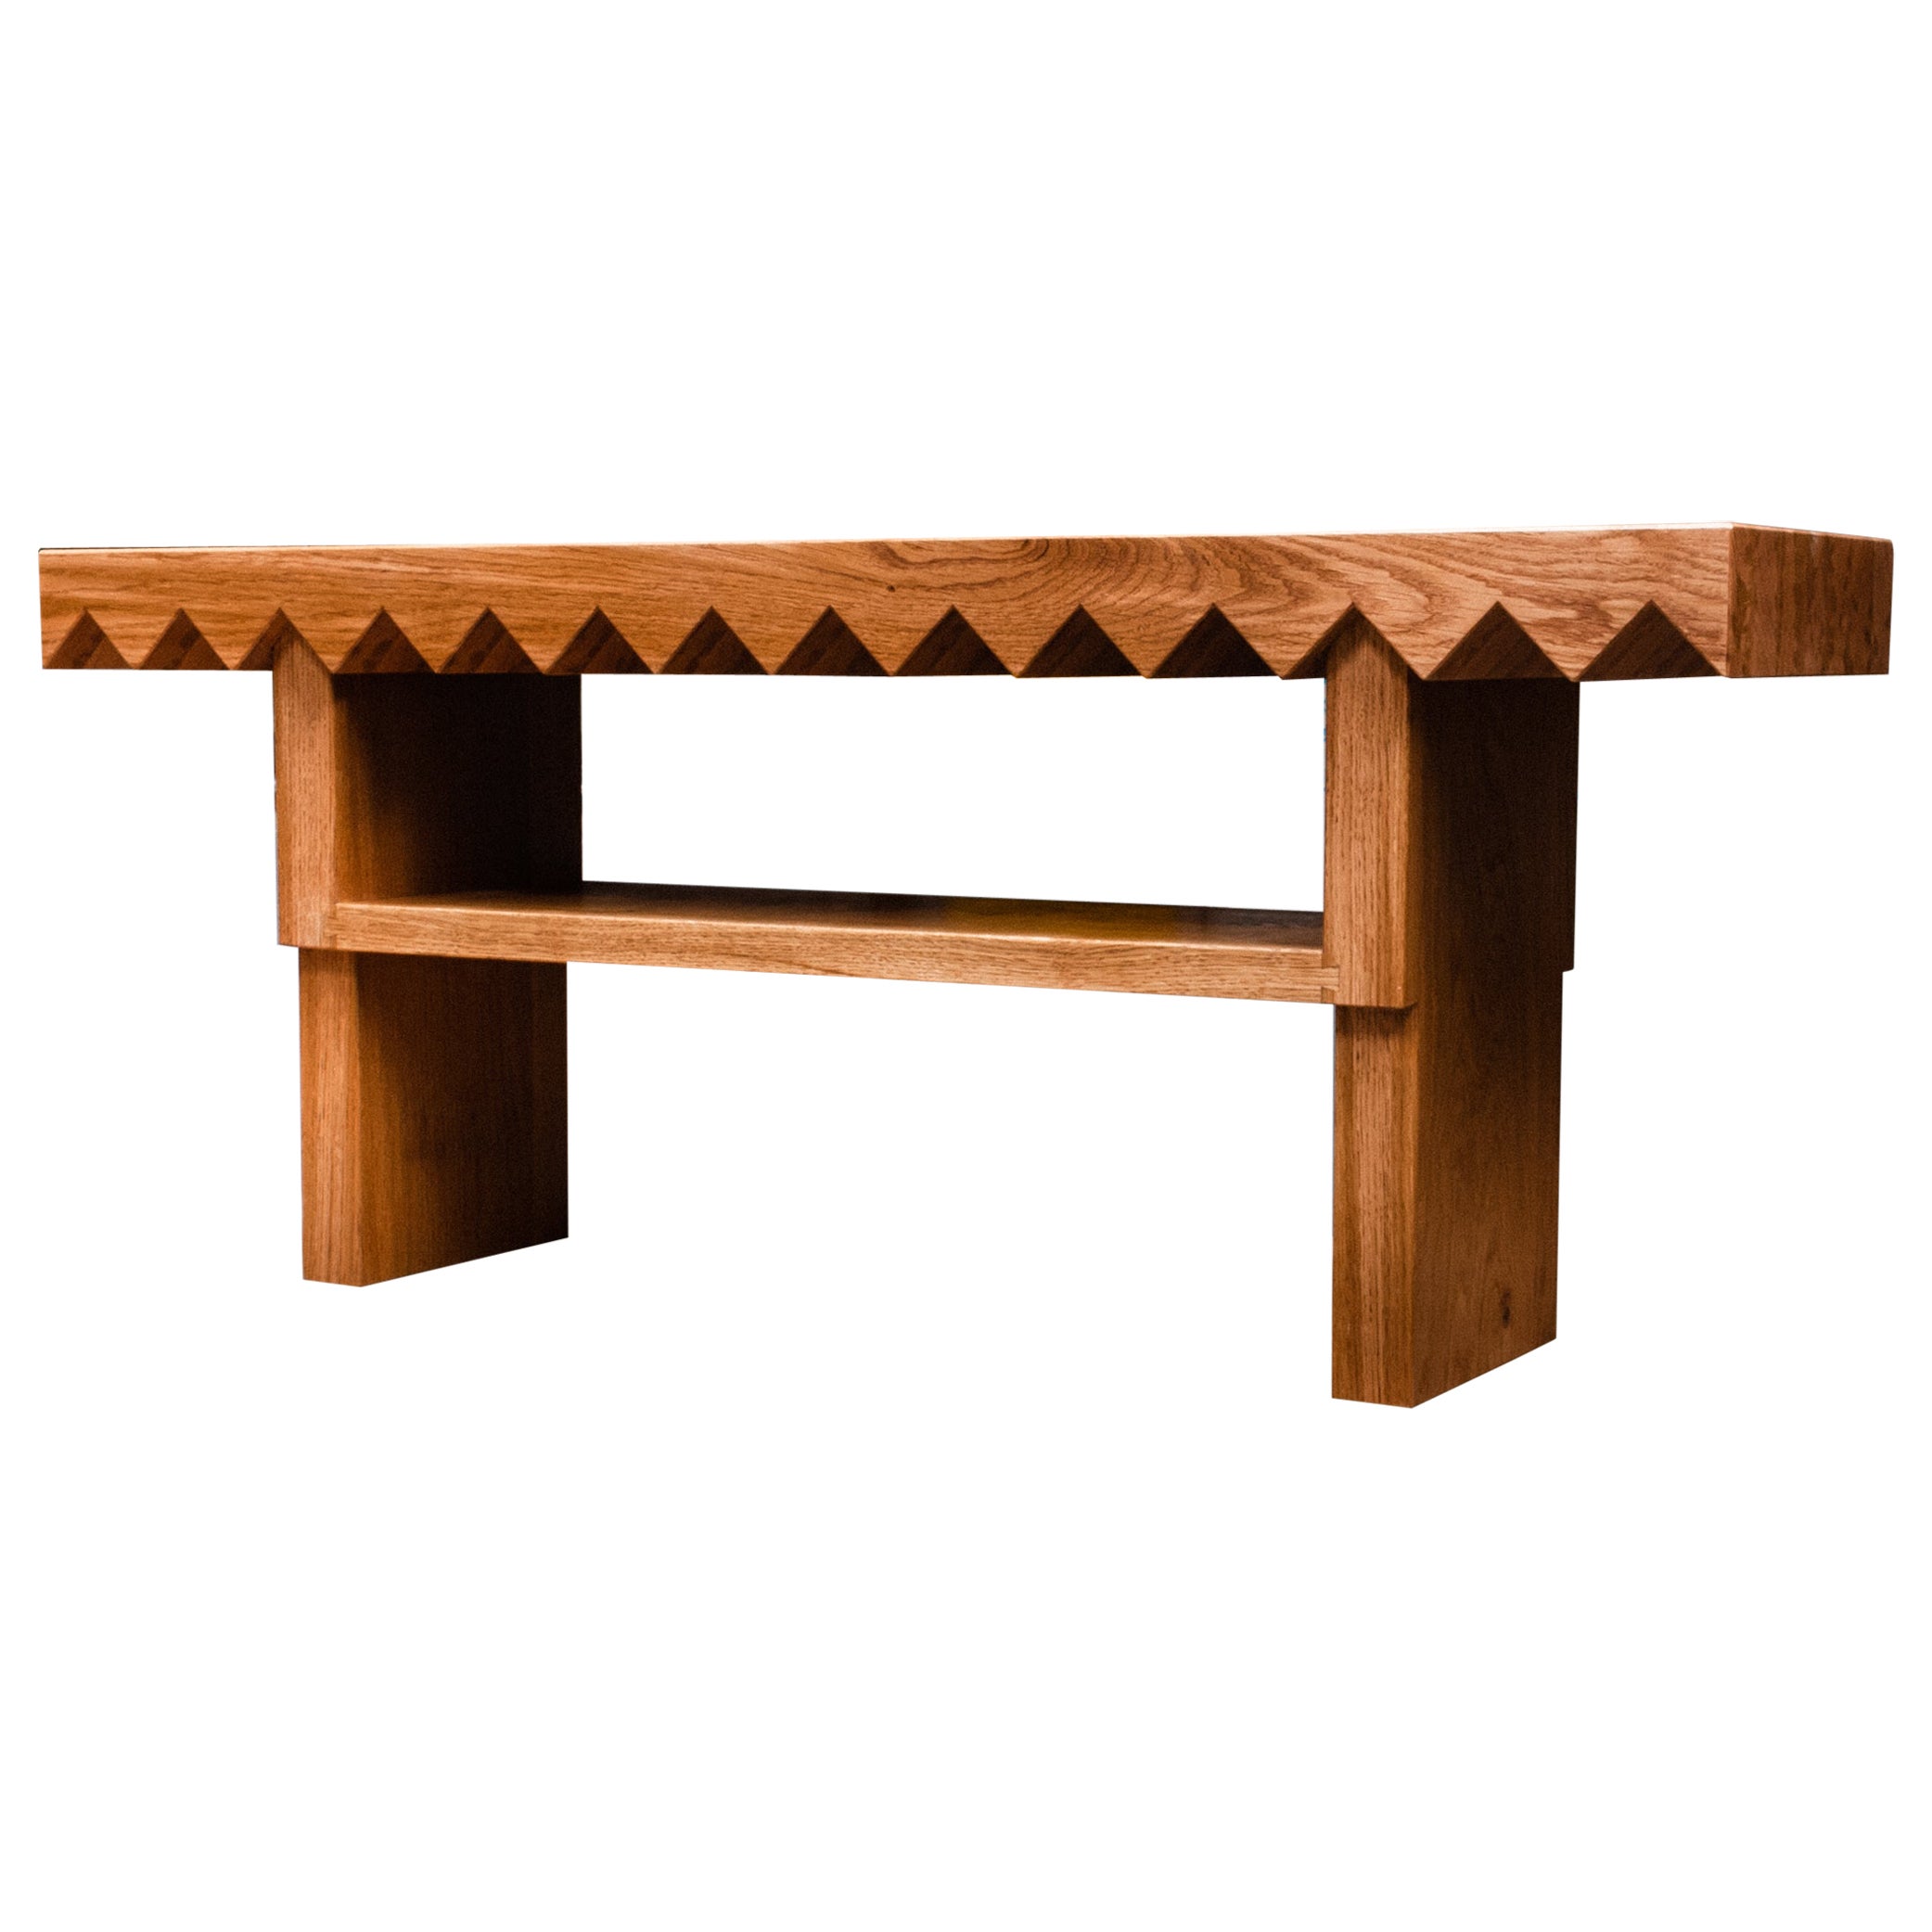 Sawtooth Bench in Solid English Oak, Designed and Handmade by Loose Fit, UK For Sale